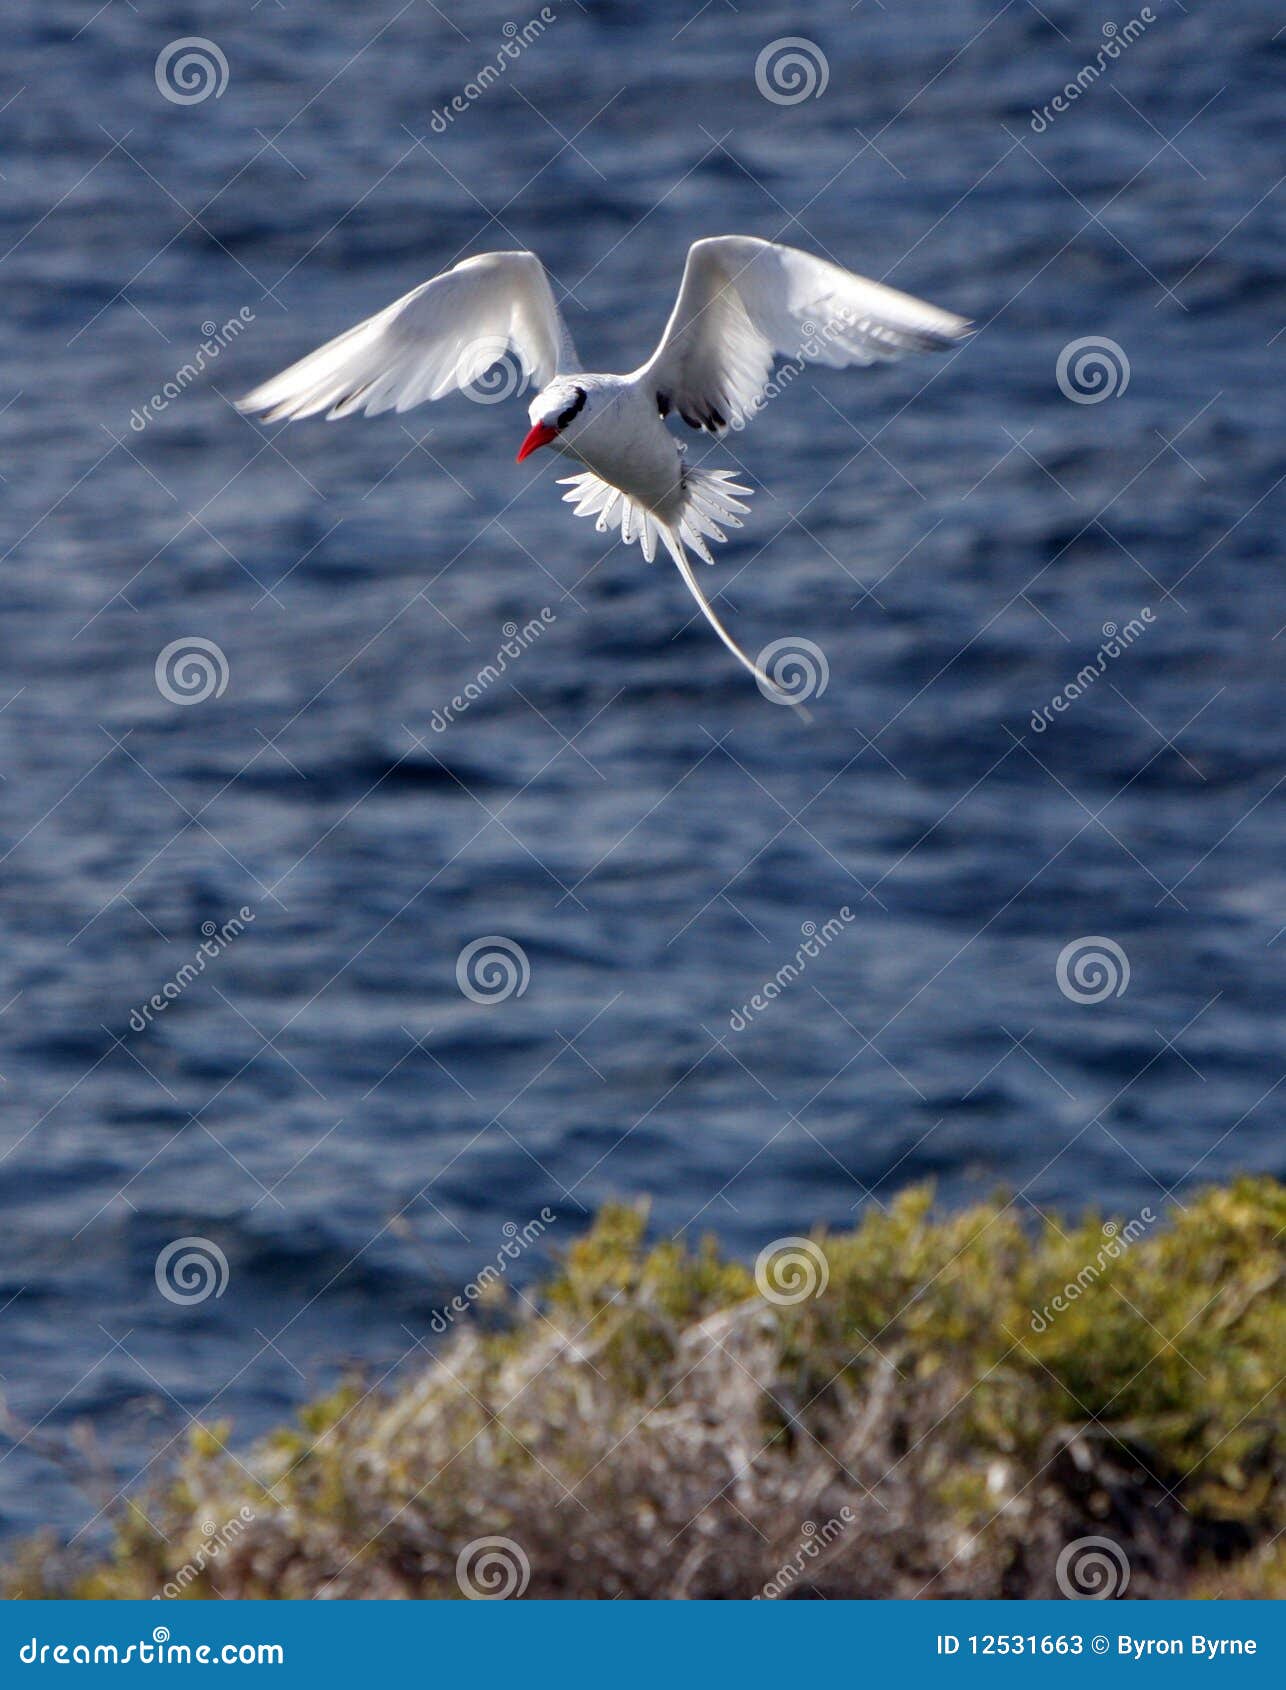 galapagos red-billed tropic bird about to land